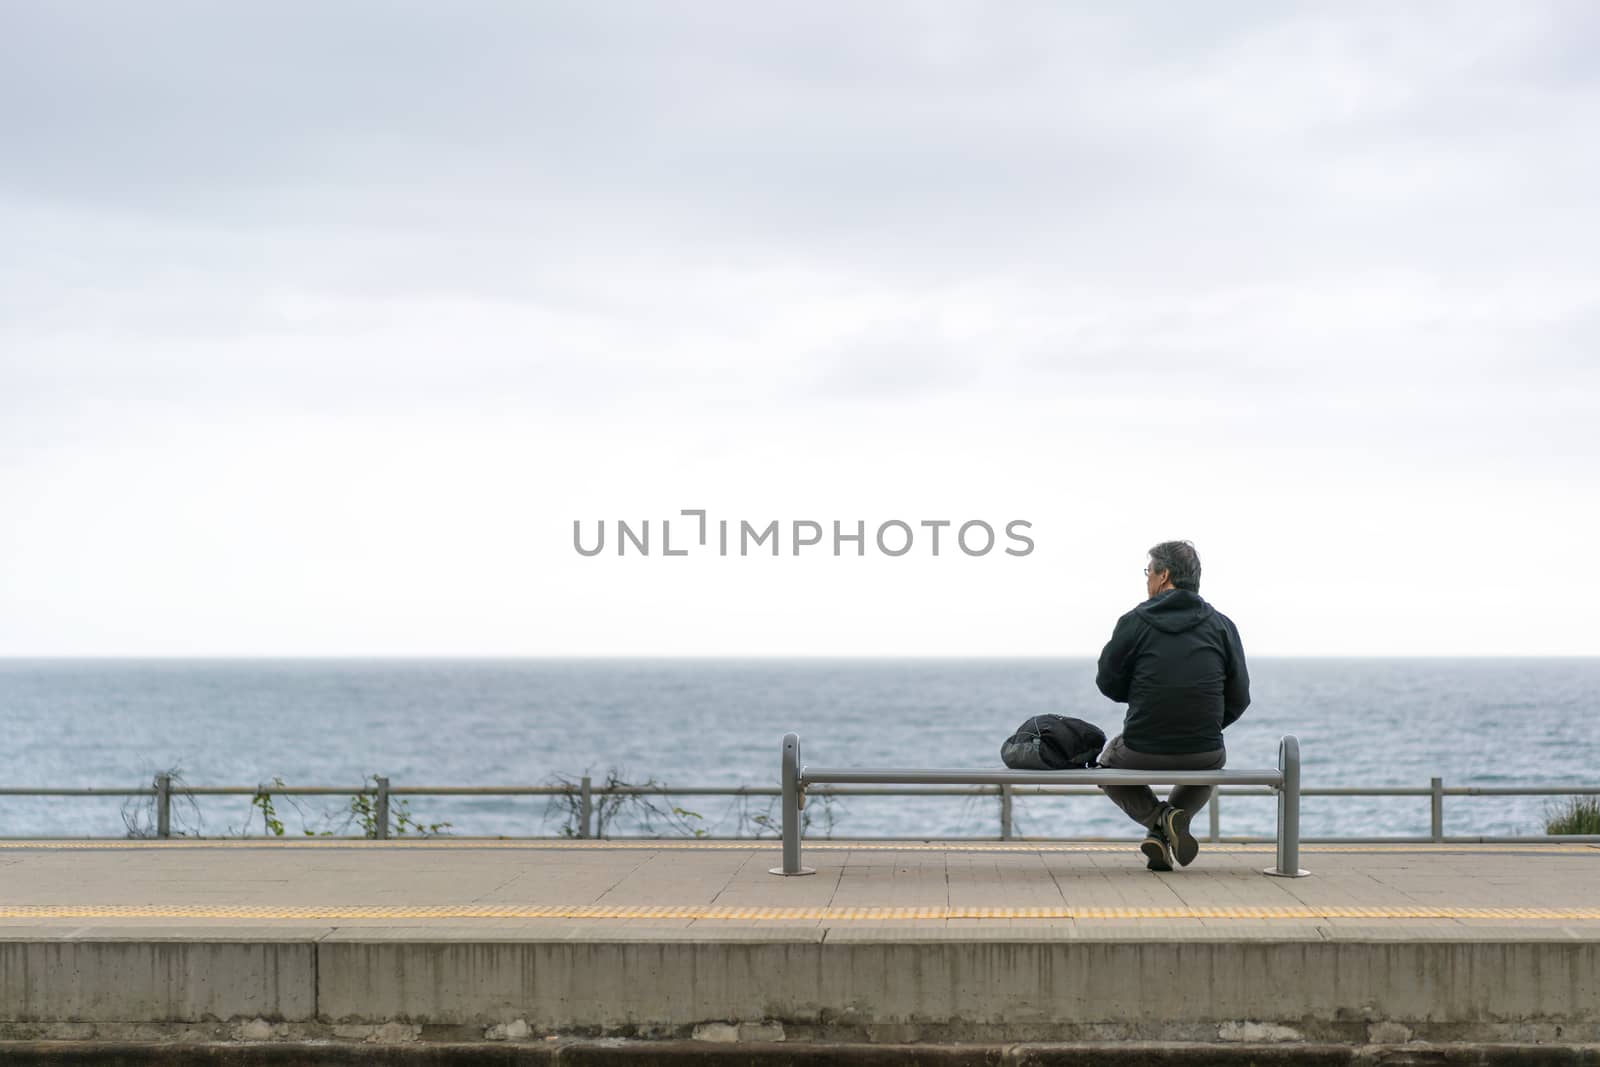 Corniglia, Italy - Apr 8, 2016: Unidentified backpacker old man tourist wait for train by the ocean with gloomy sky background, looking at copy space, at Corniglia train station, Cinque Terre, Italy by beer5020